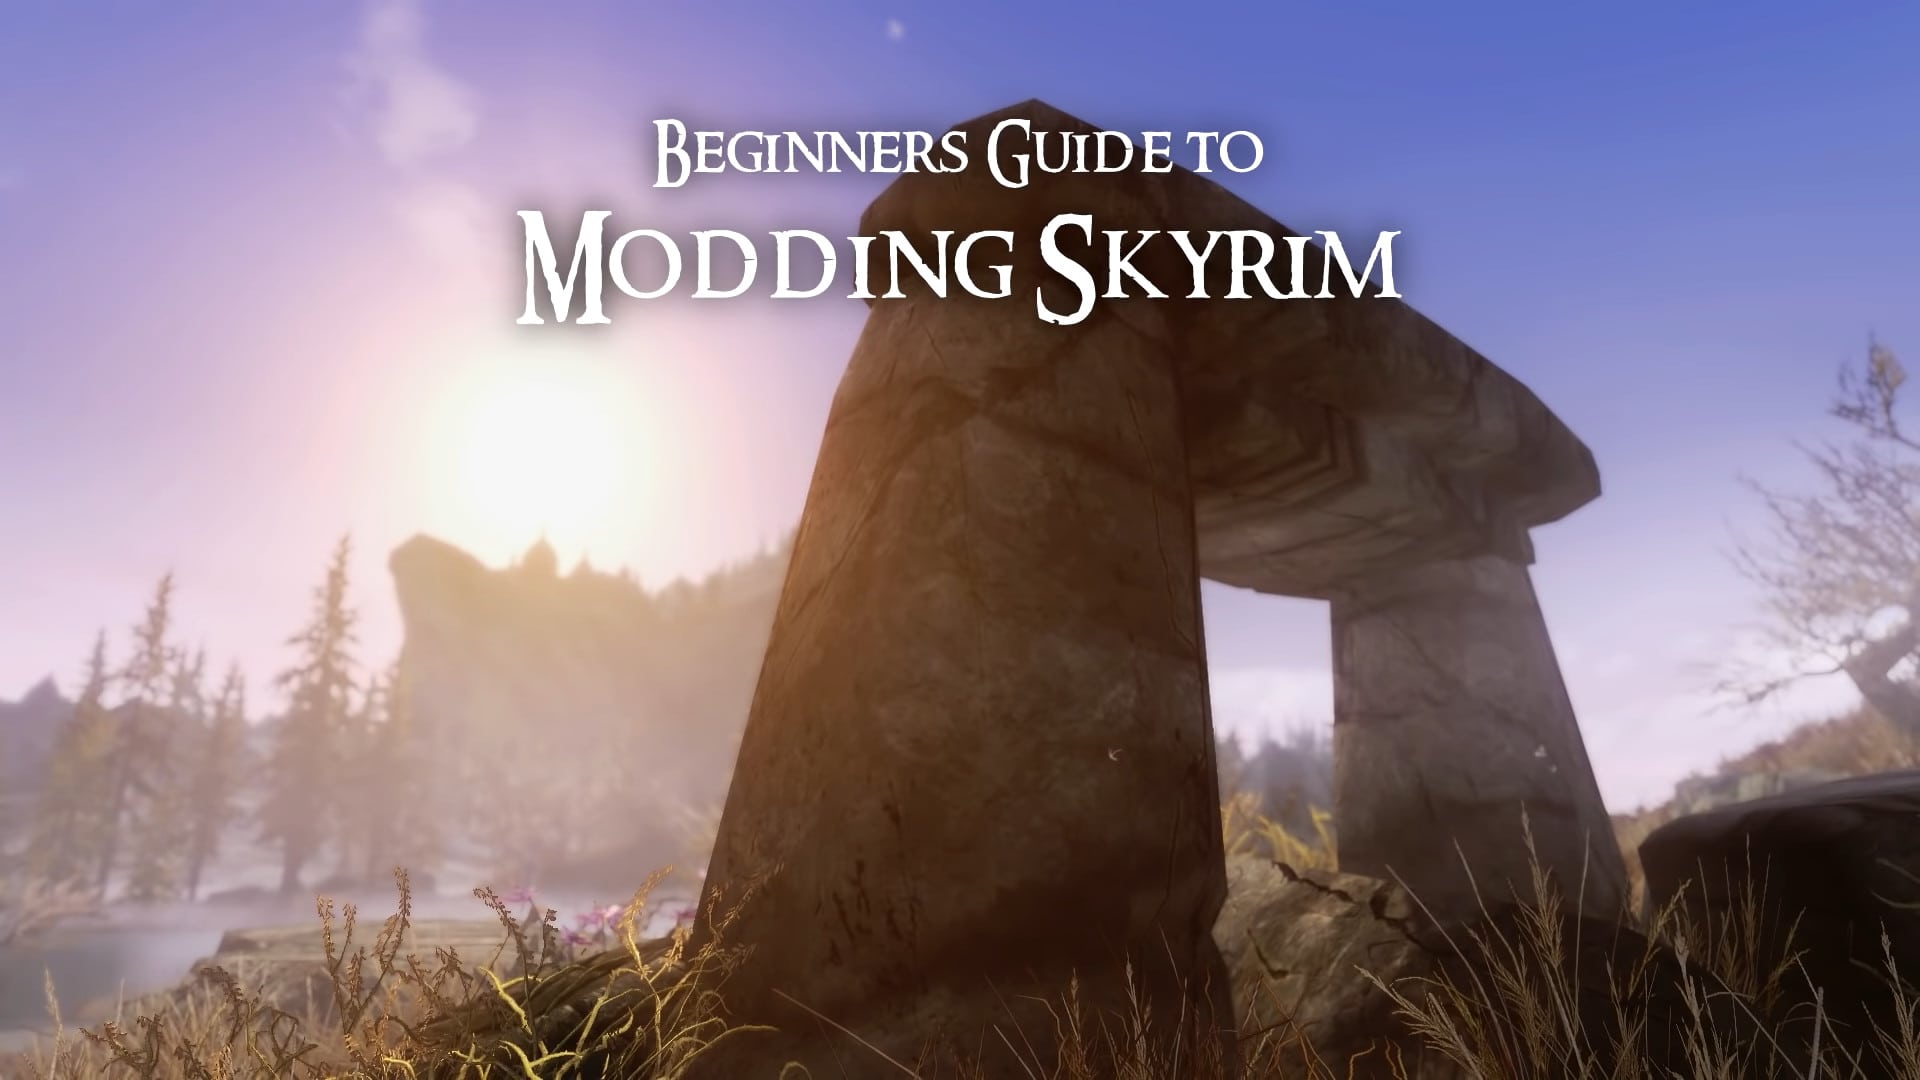 How To Install Skyrim Mods Easy For Beginners